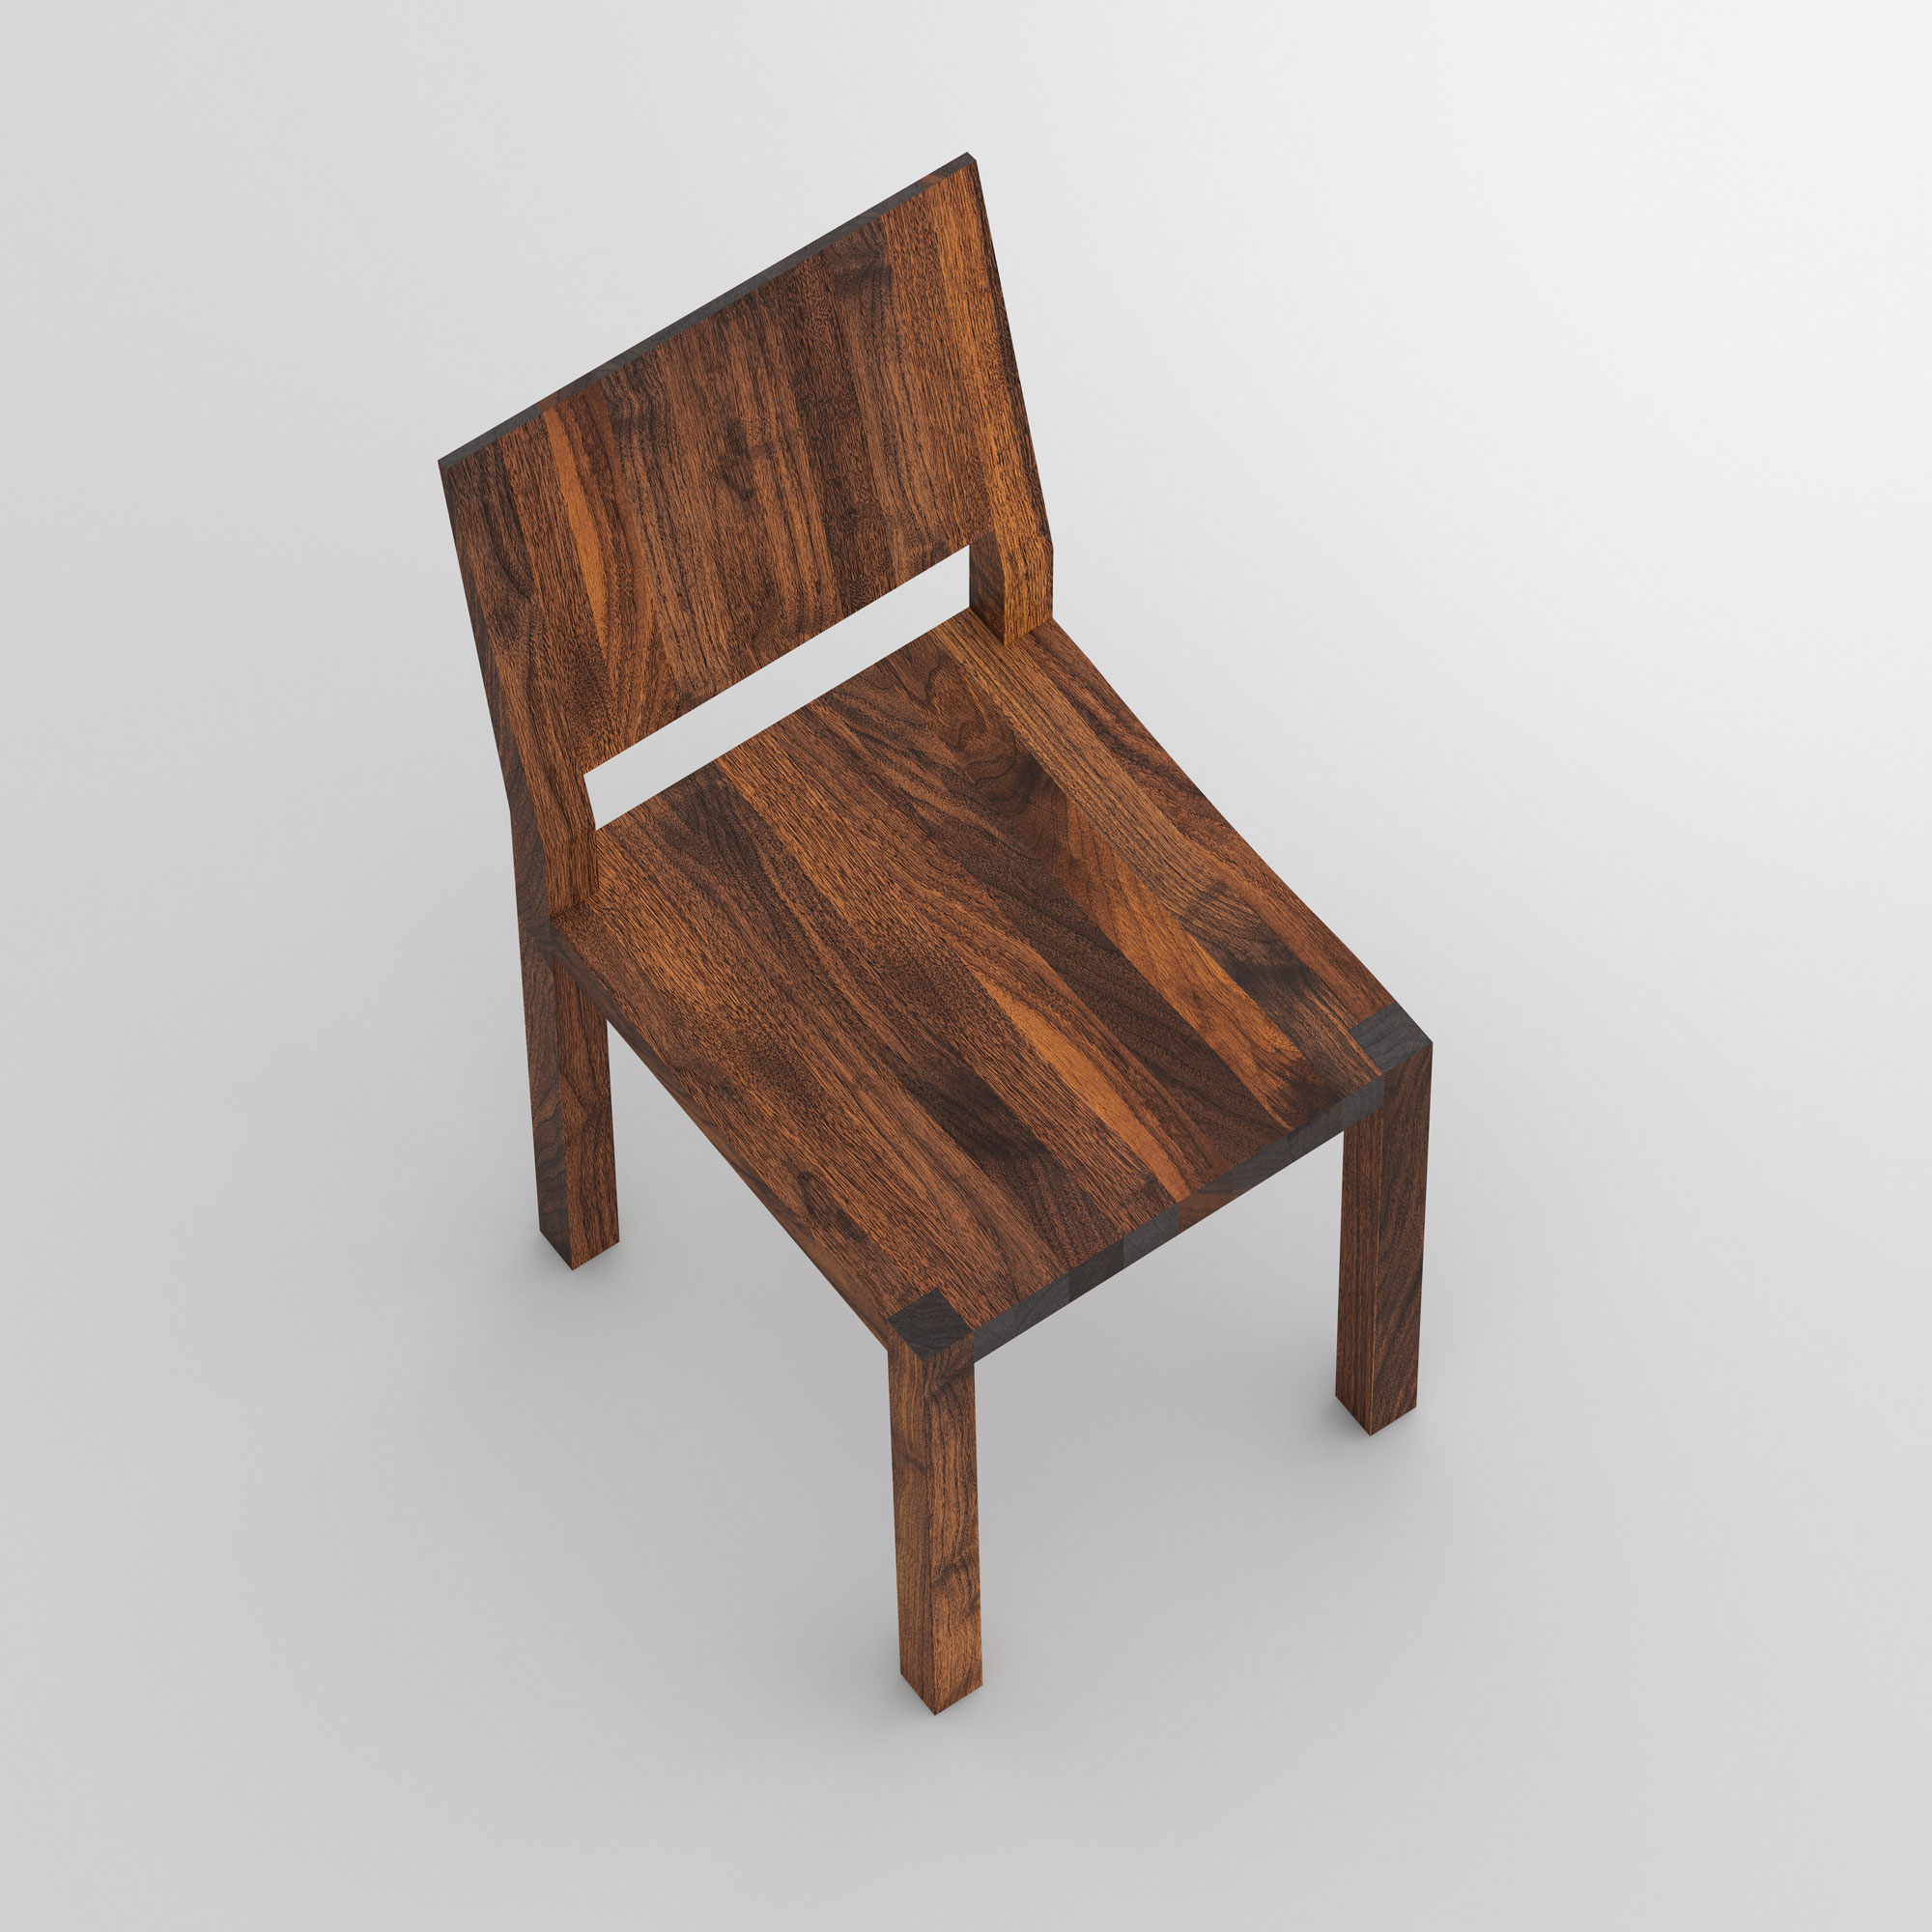 Solid Wood Chair TAU cam2 custom made in solid wood by vitamin design